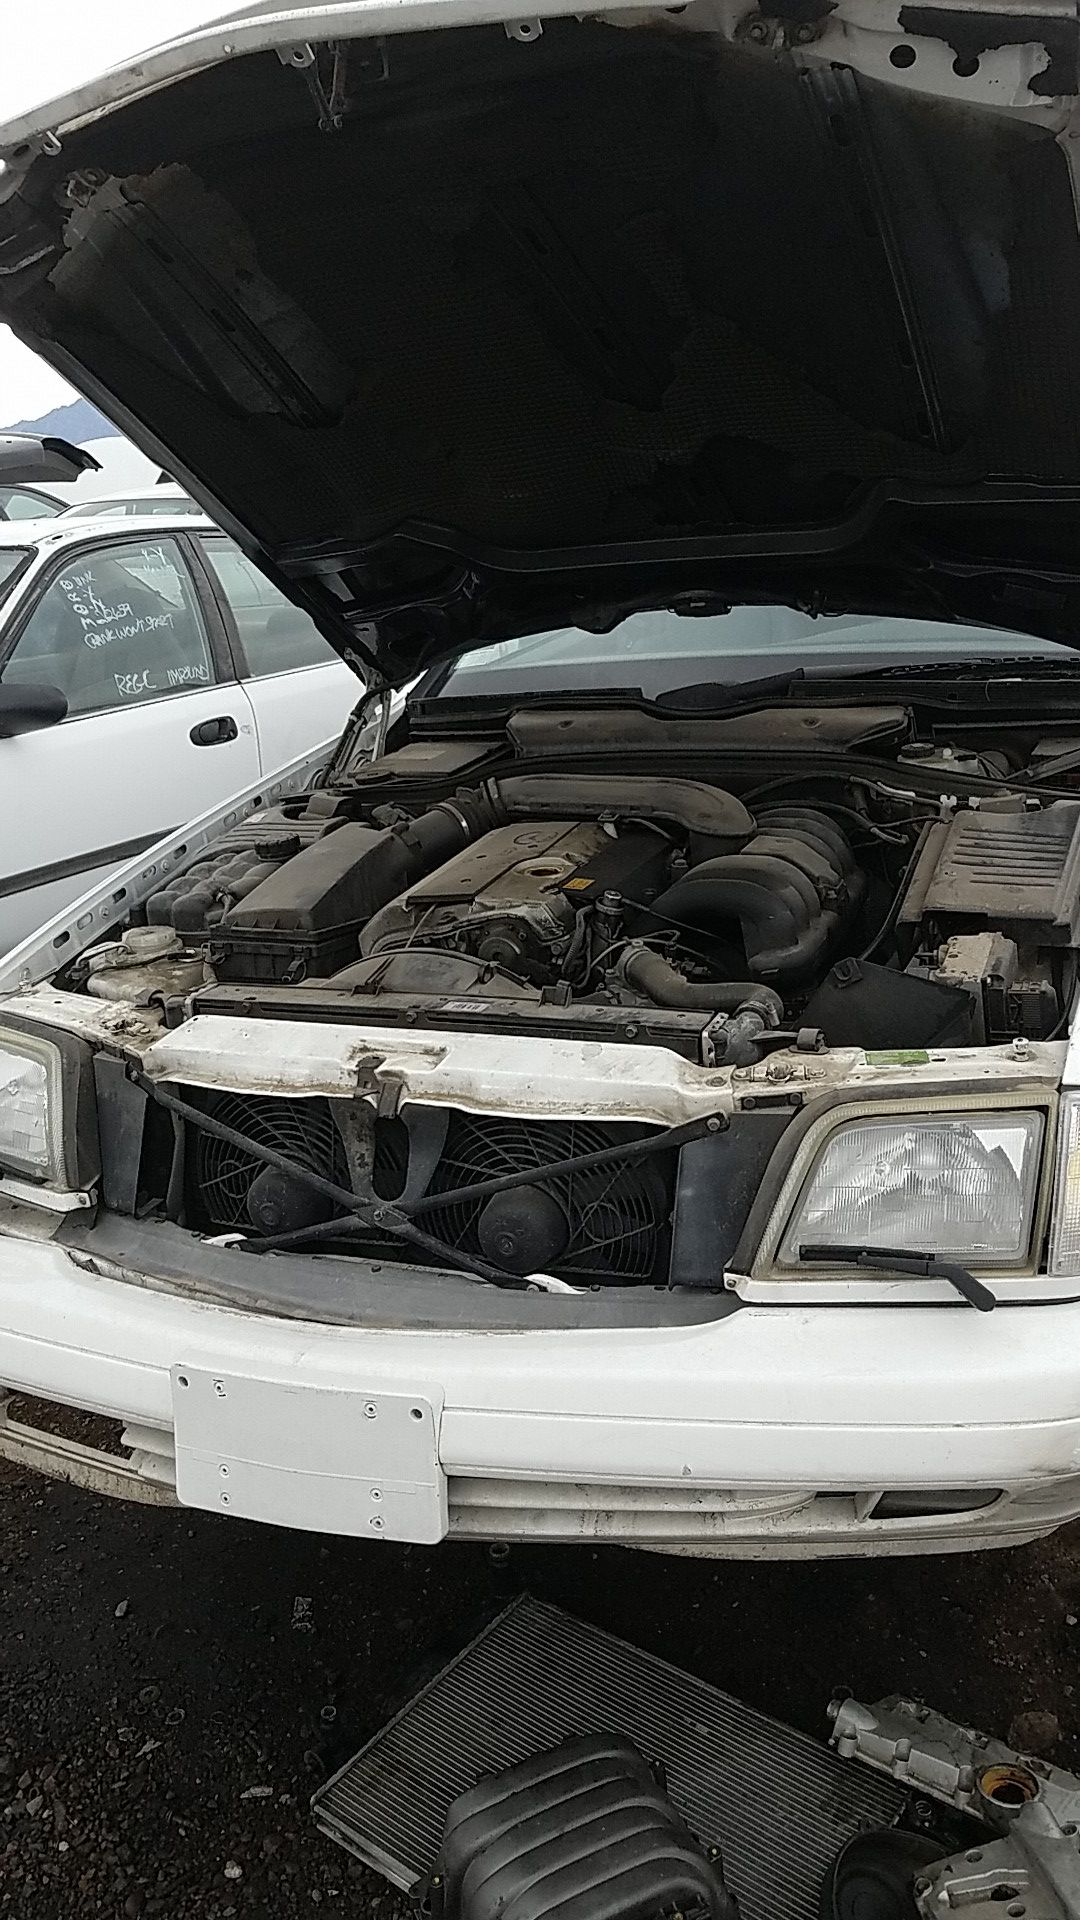 97 Mercedes SL320 - Parting out only